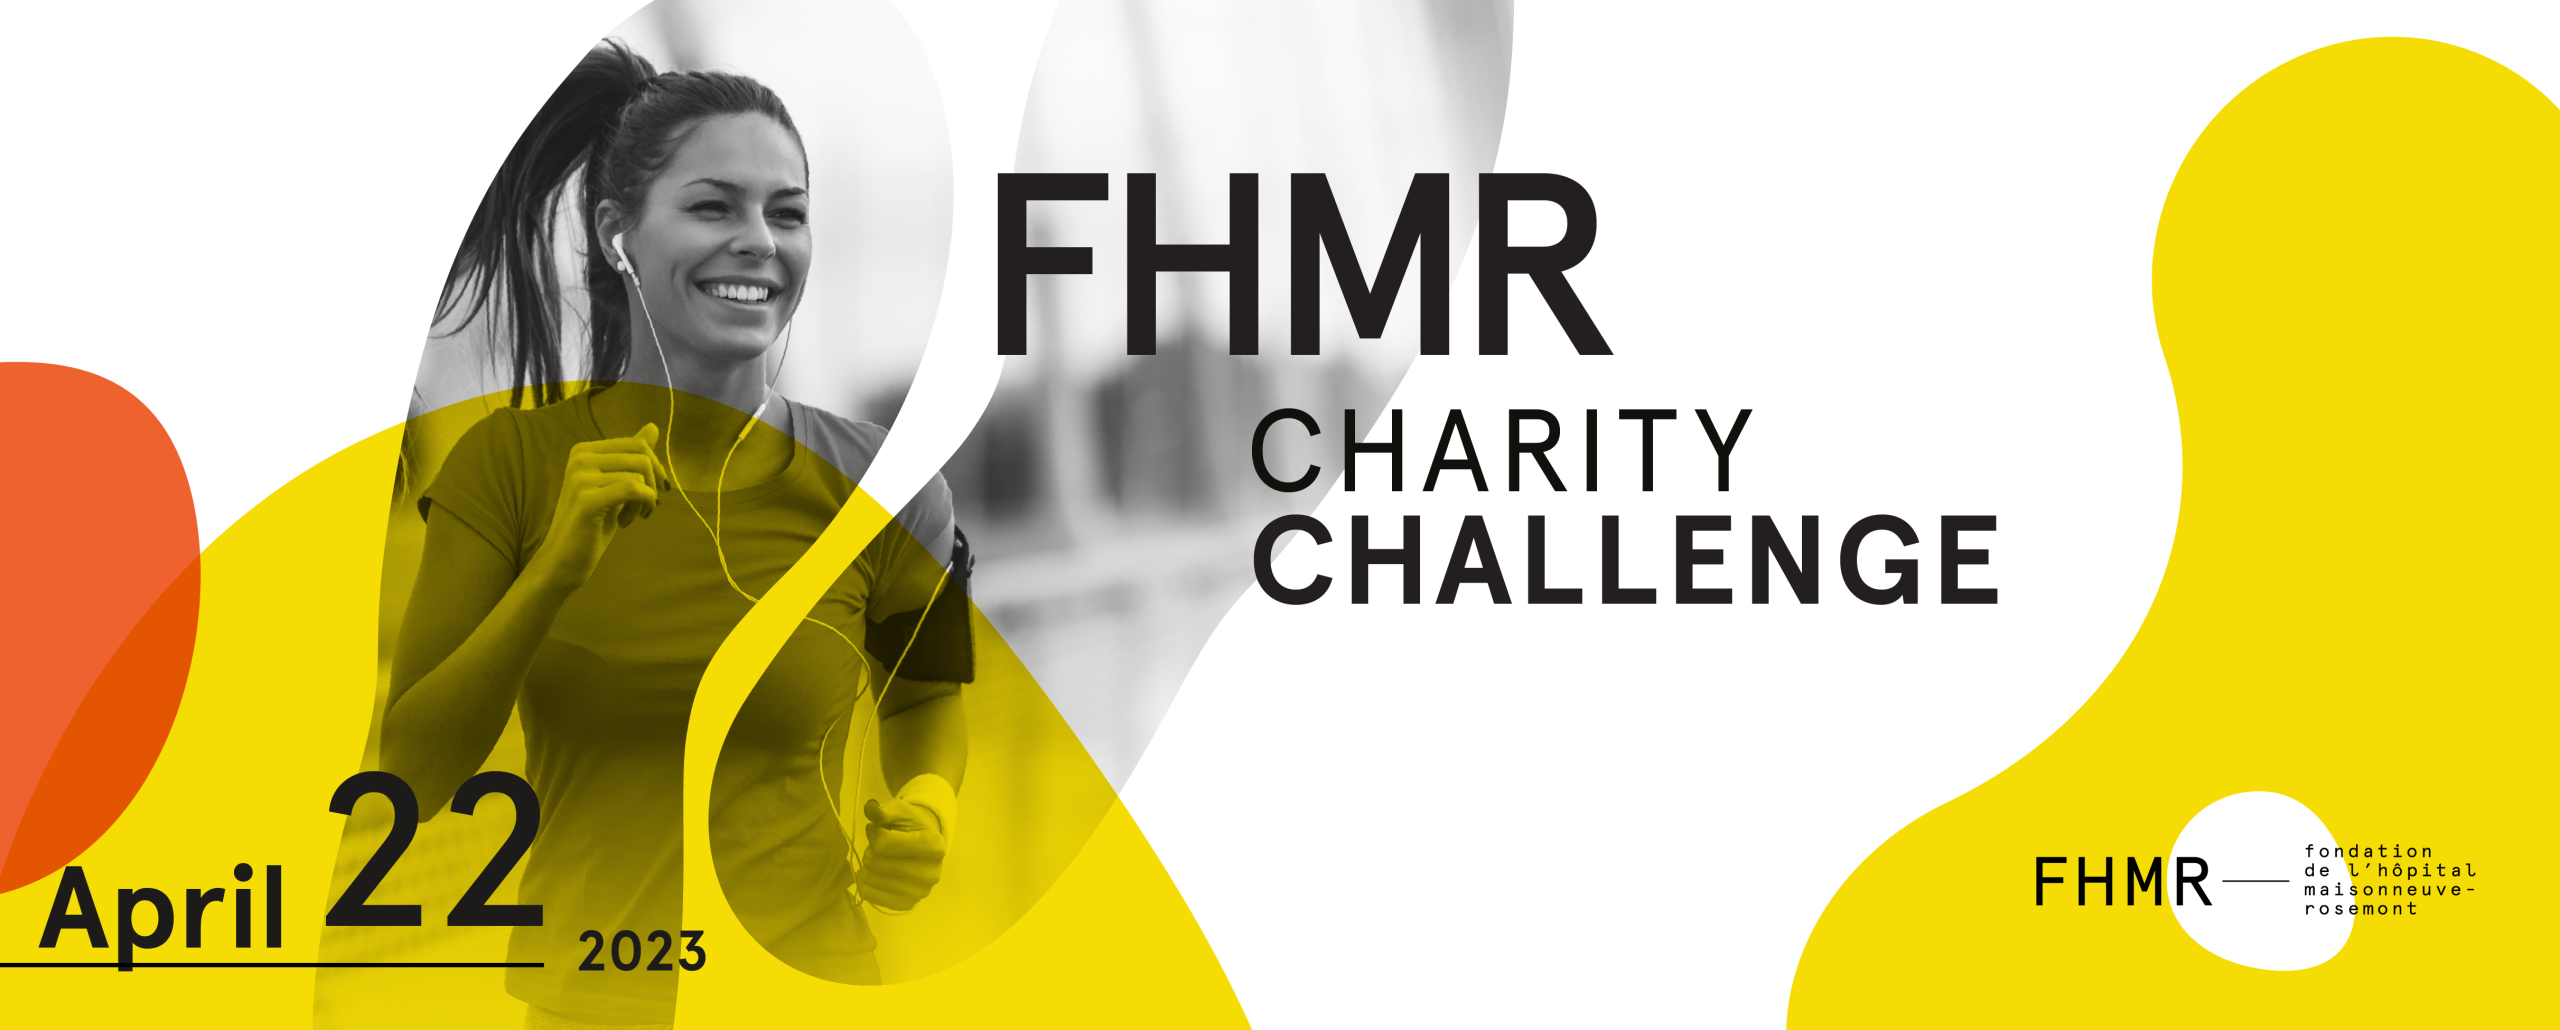 FHMR Charity Challenge